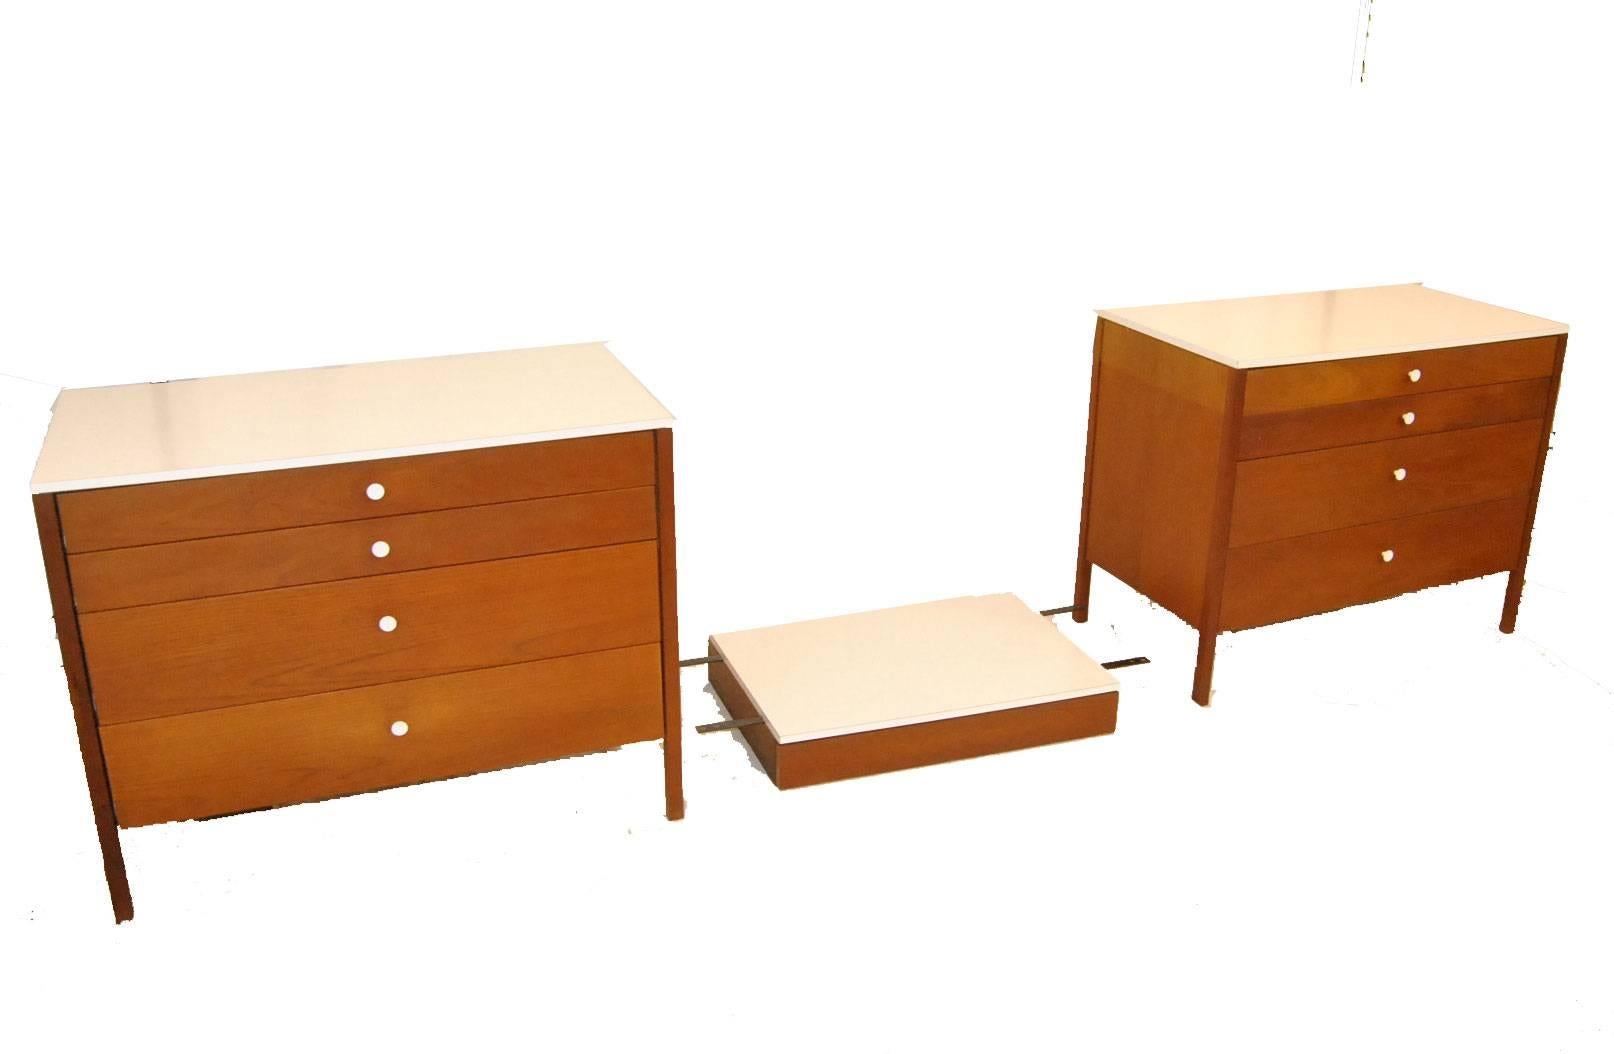 A great three-piece dresser set in very good original condition by Florence Knoll. The set includes two four-drawer chests with white metal pulls and a floating desk / vanity with one drawer. Tops and backs are done in white laminate. Original tag